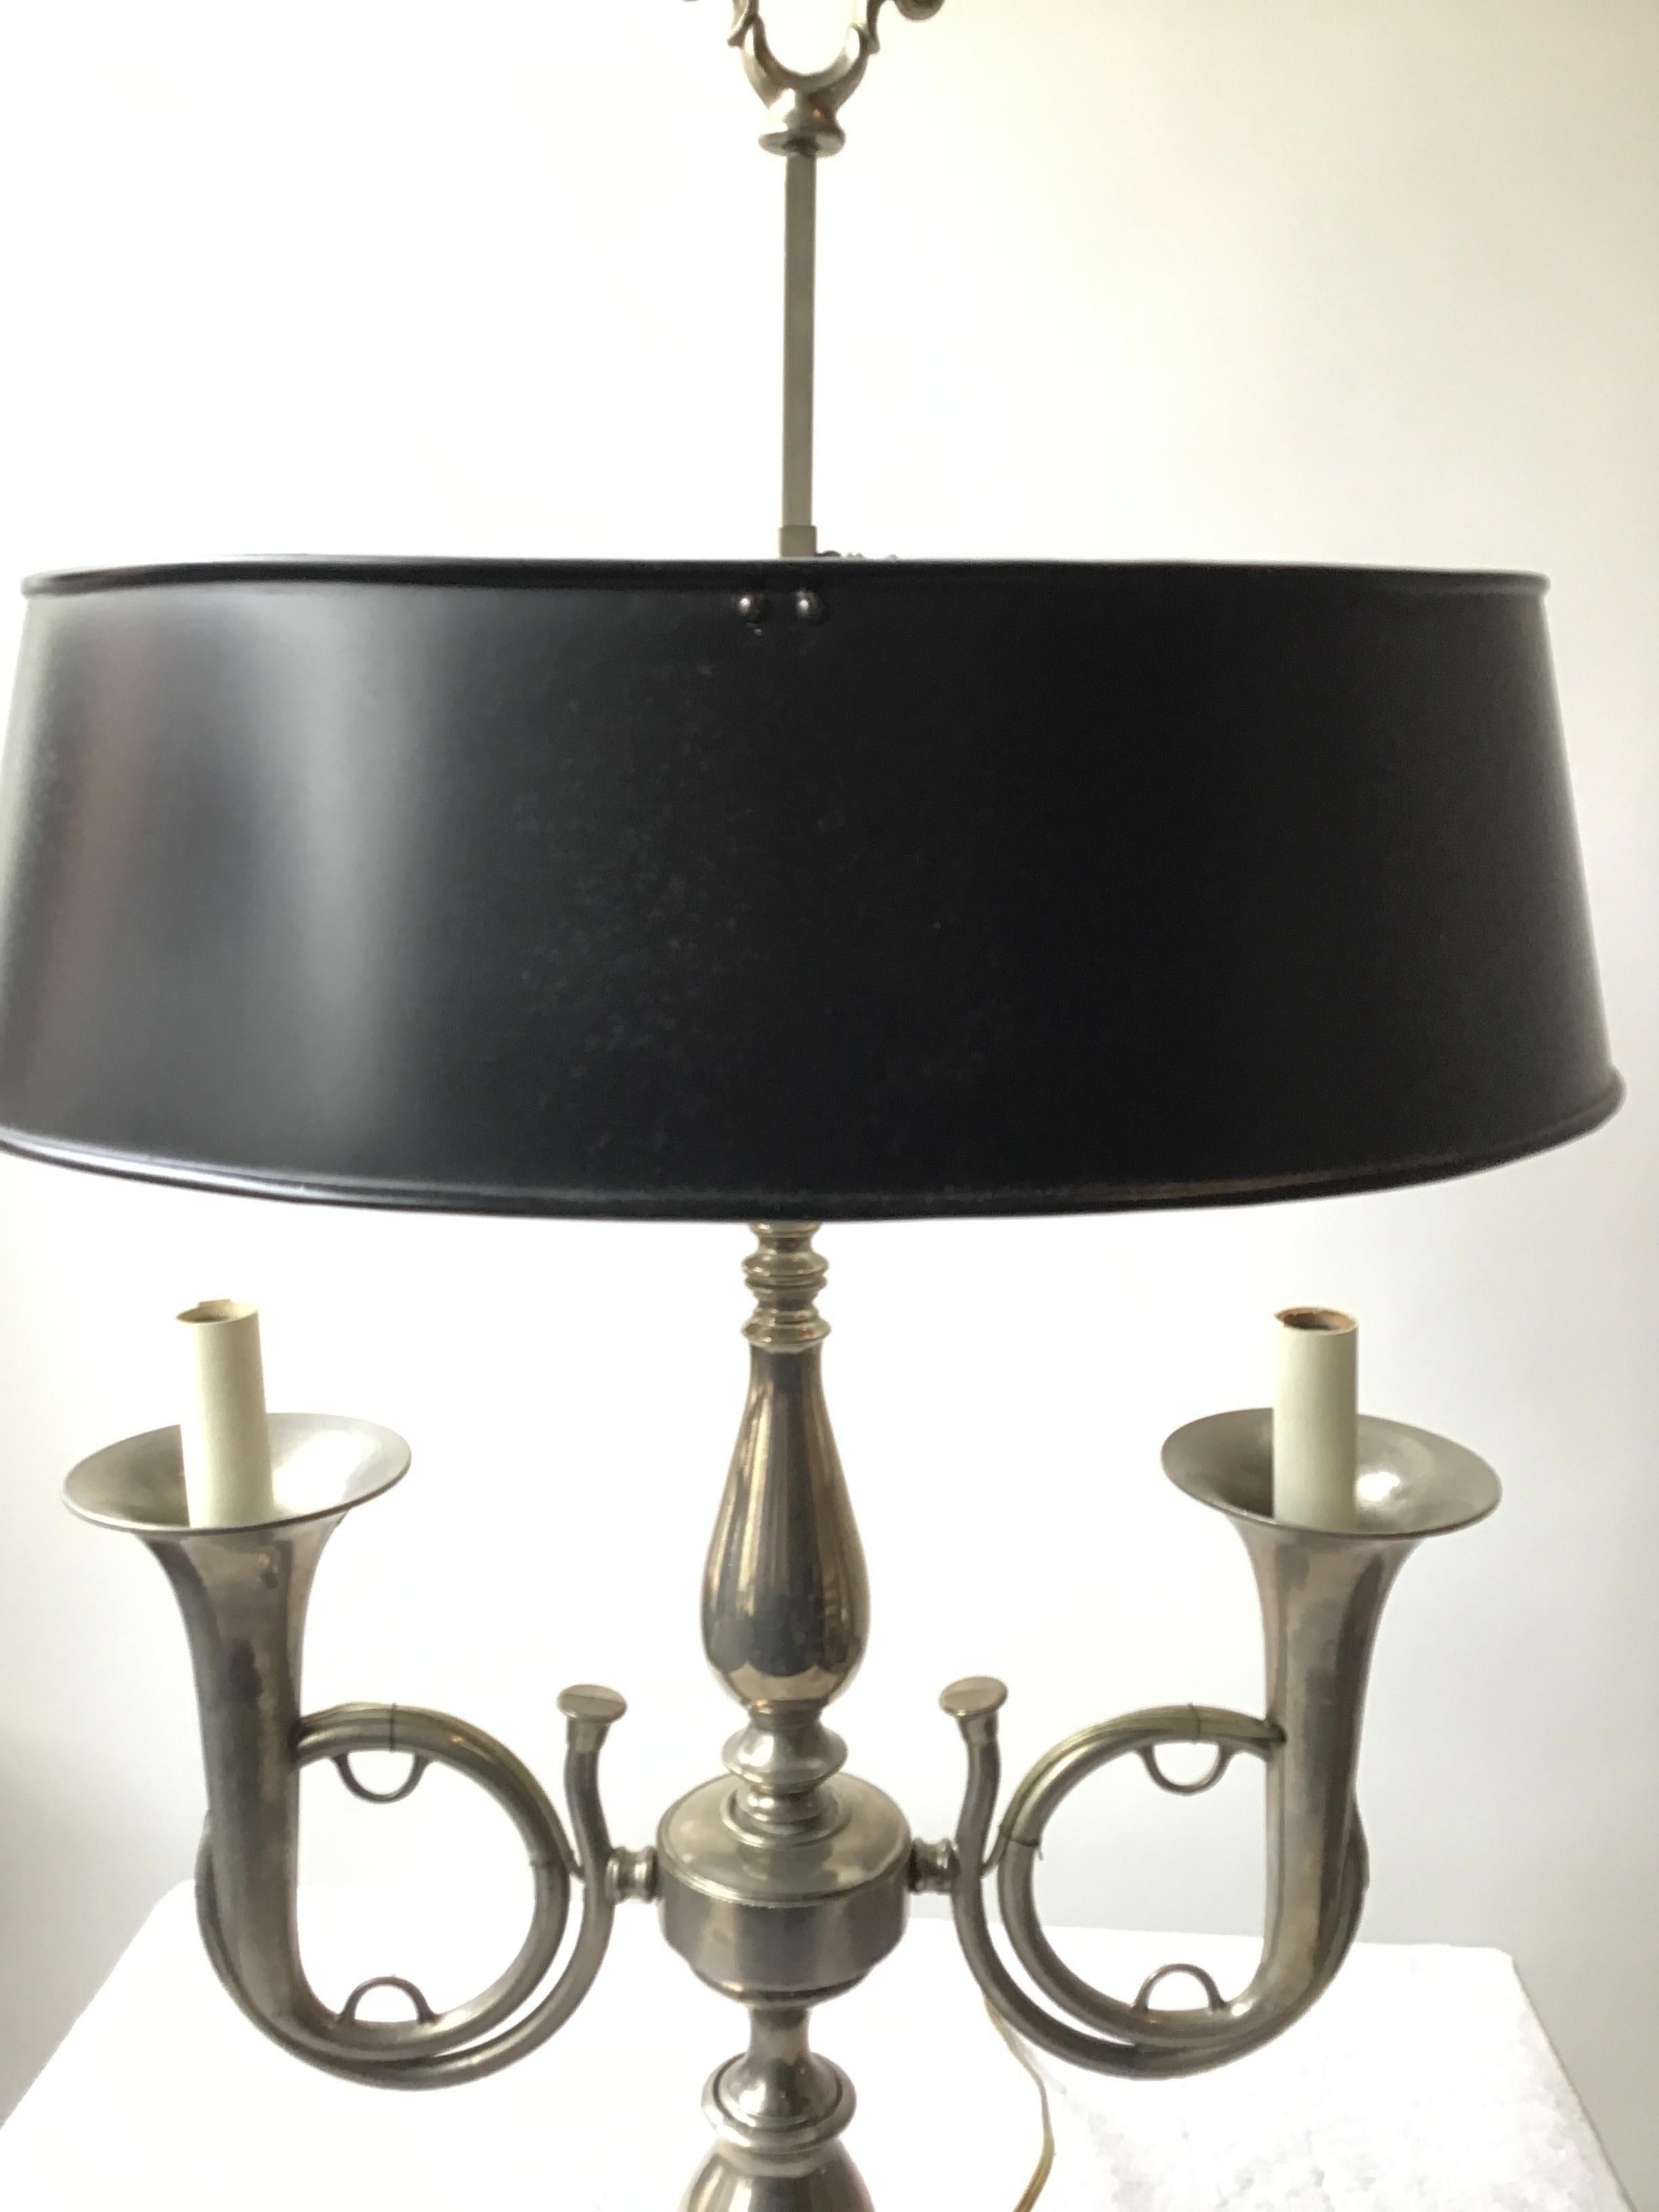 1970s Pewter Trumpet Lamp With Adjustable Tole Shade For Sale 4